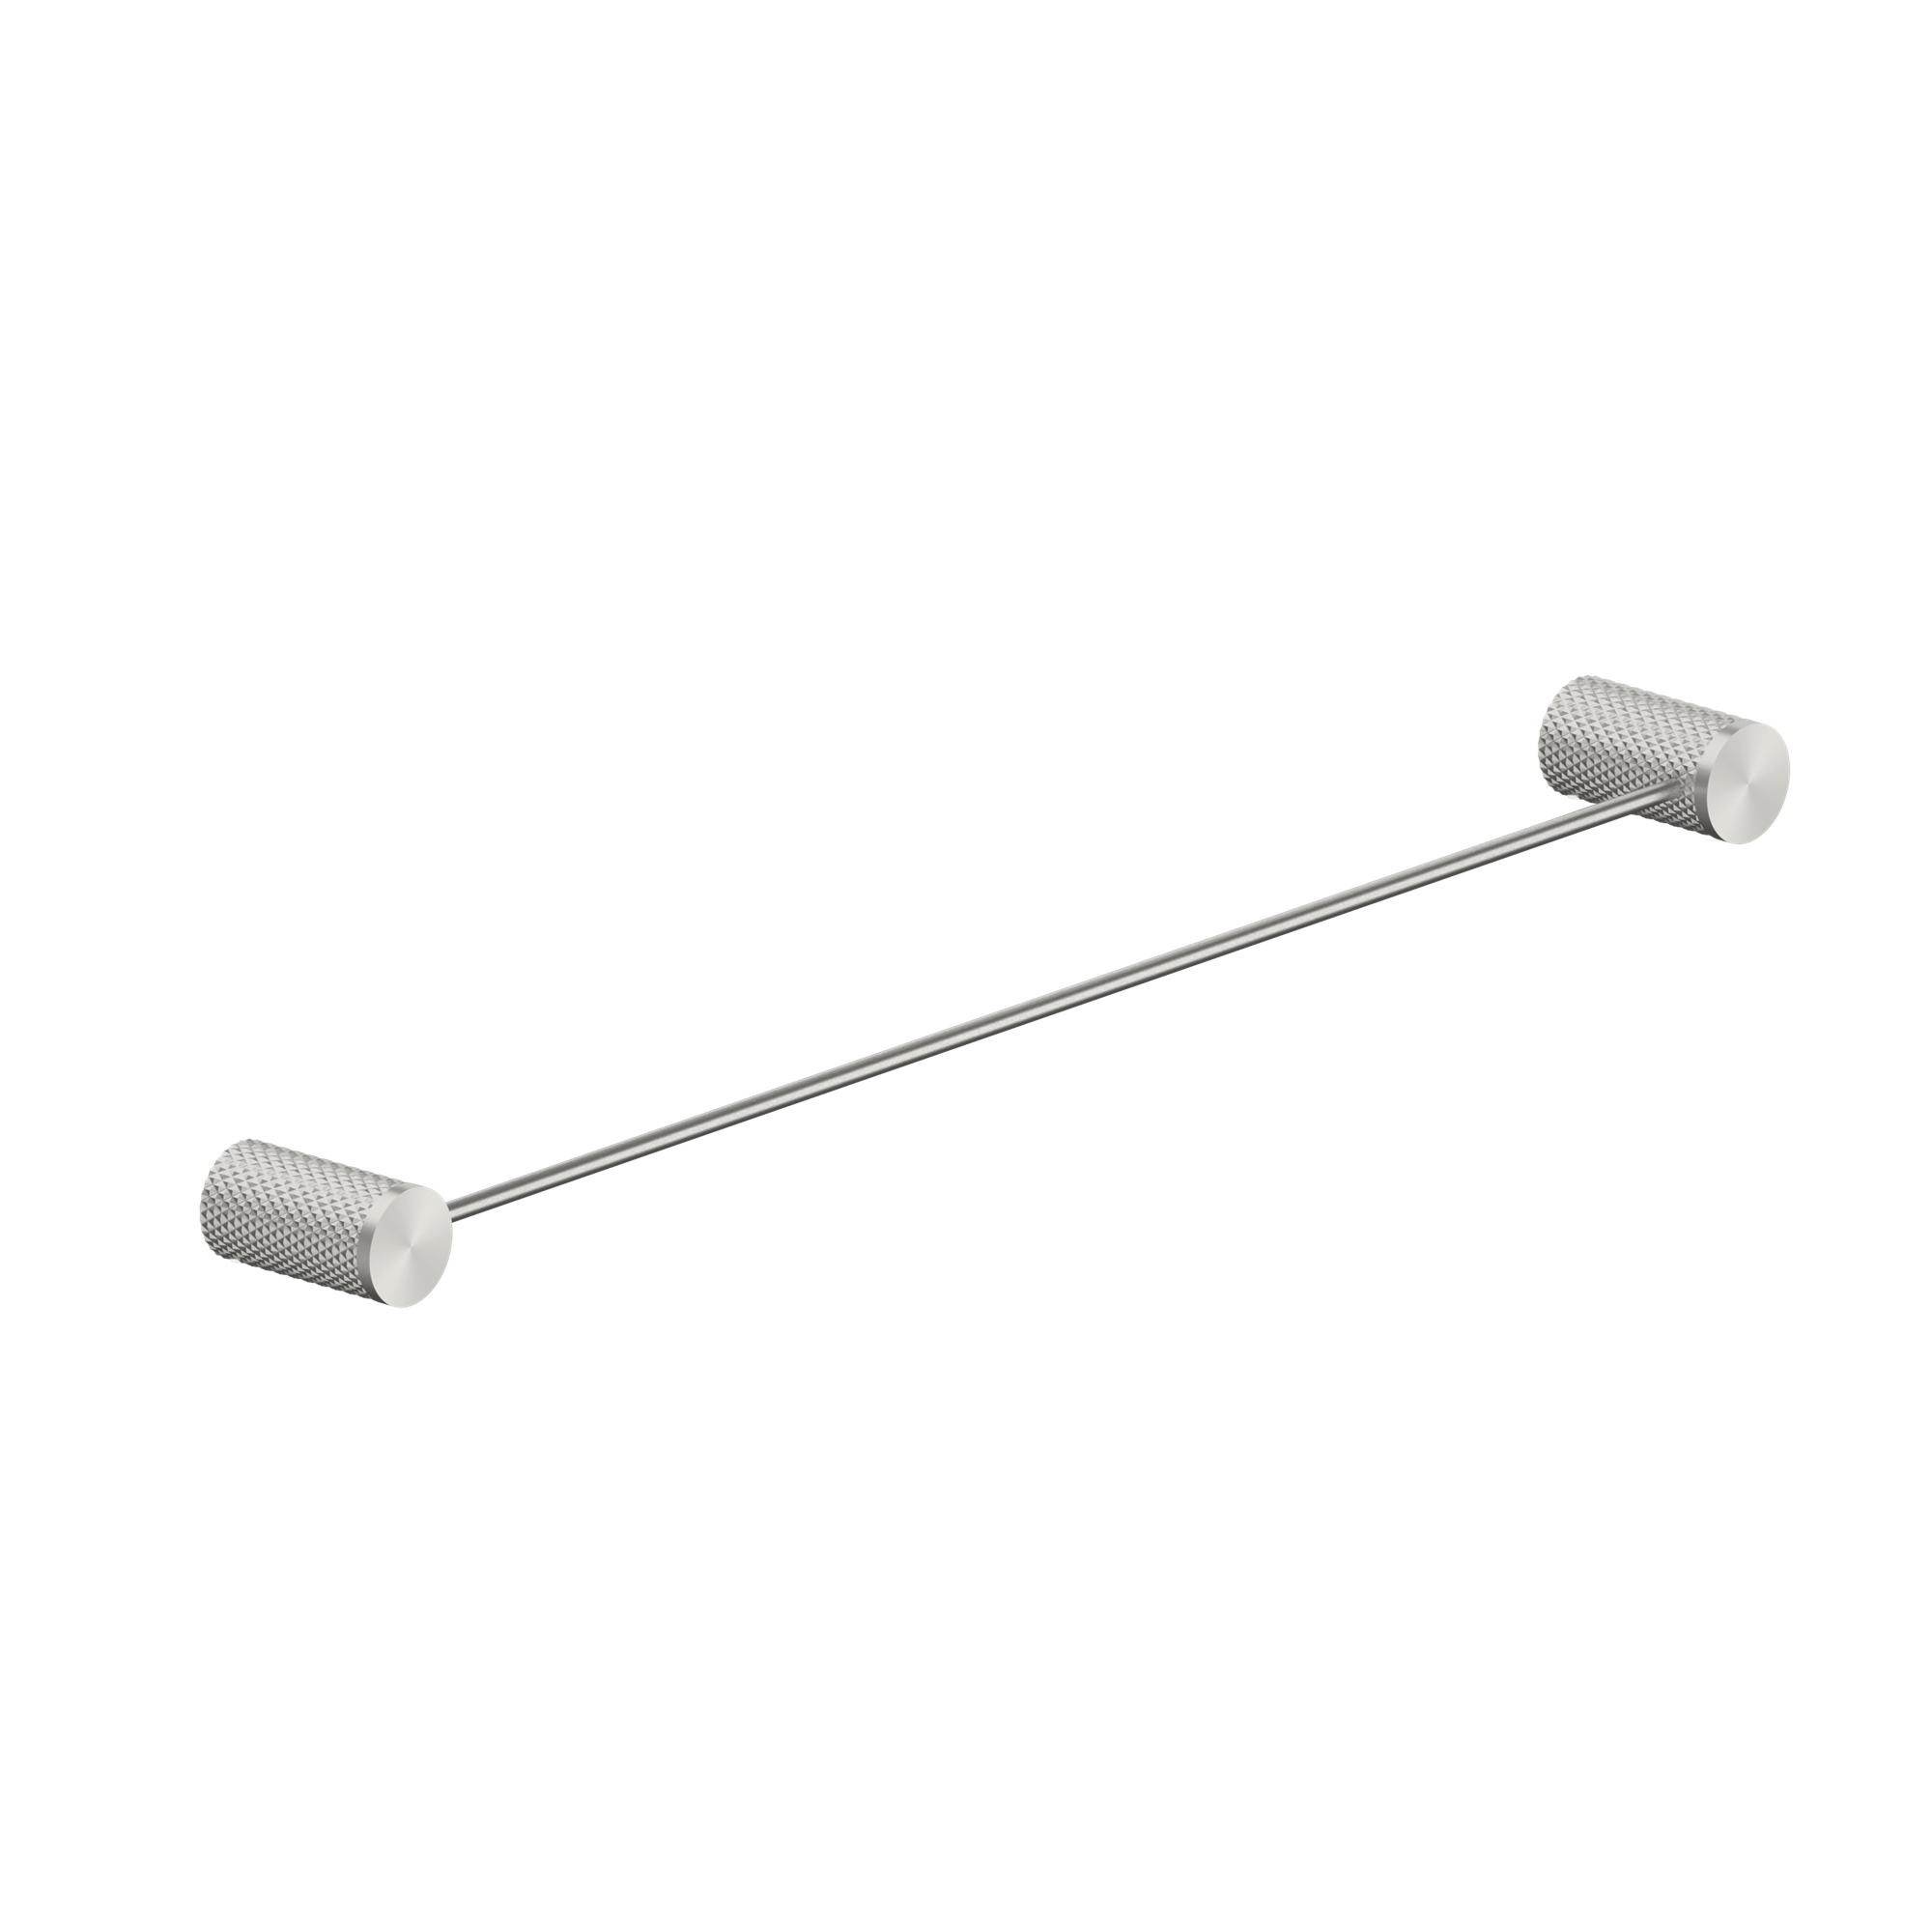 NERO OPAL NON-HEATED SINGLE TOWEL RAIL BRUSHED NICKEL (AVAILABLE IN 600MM AND 800MM)